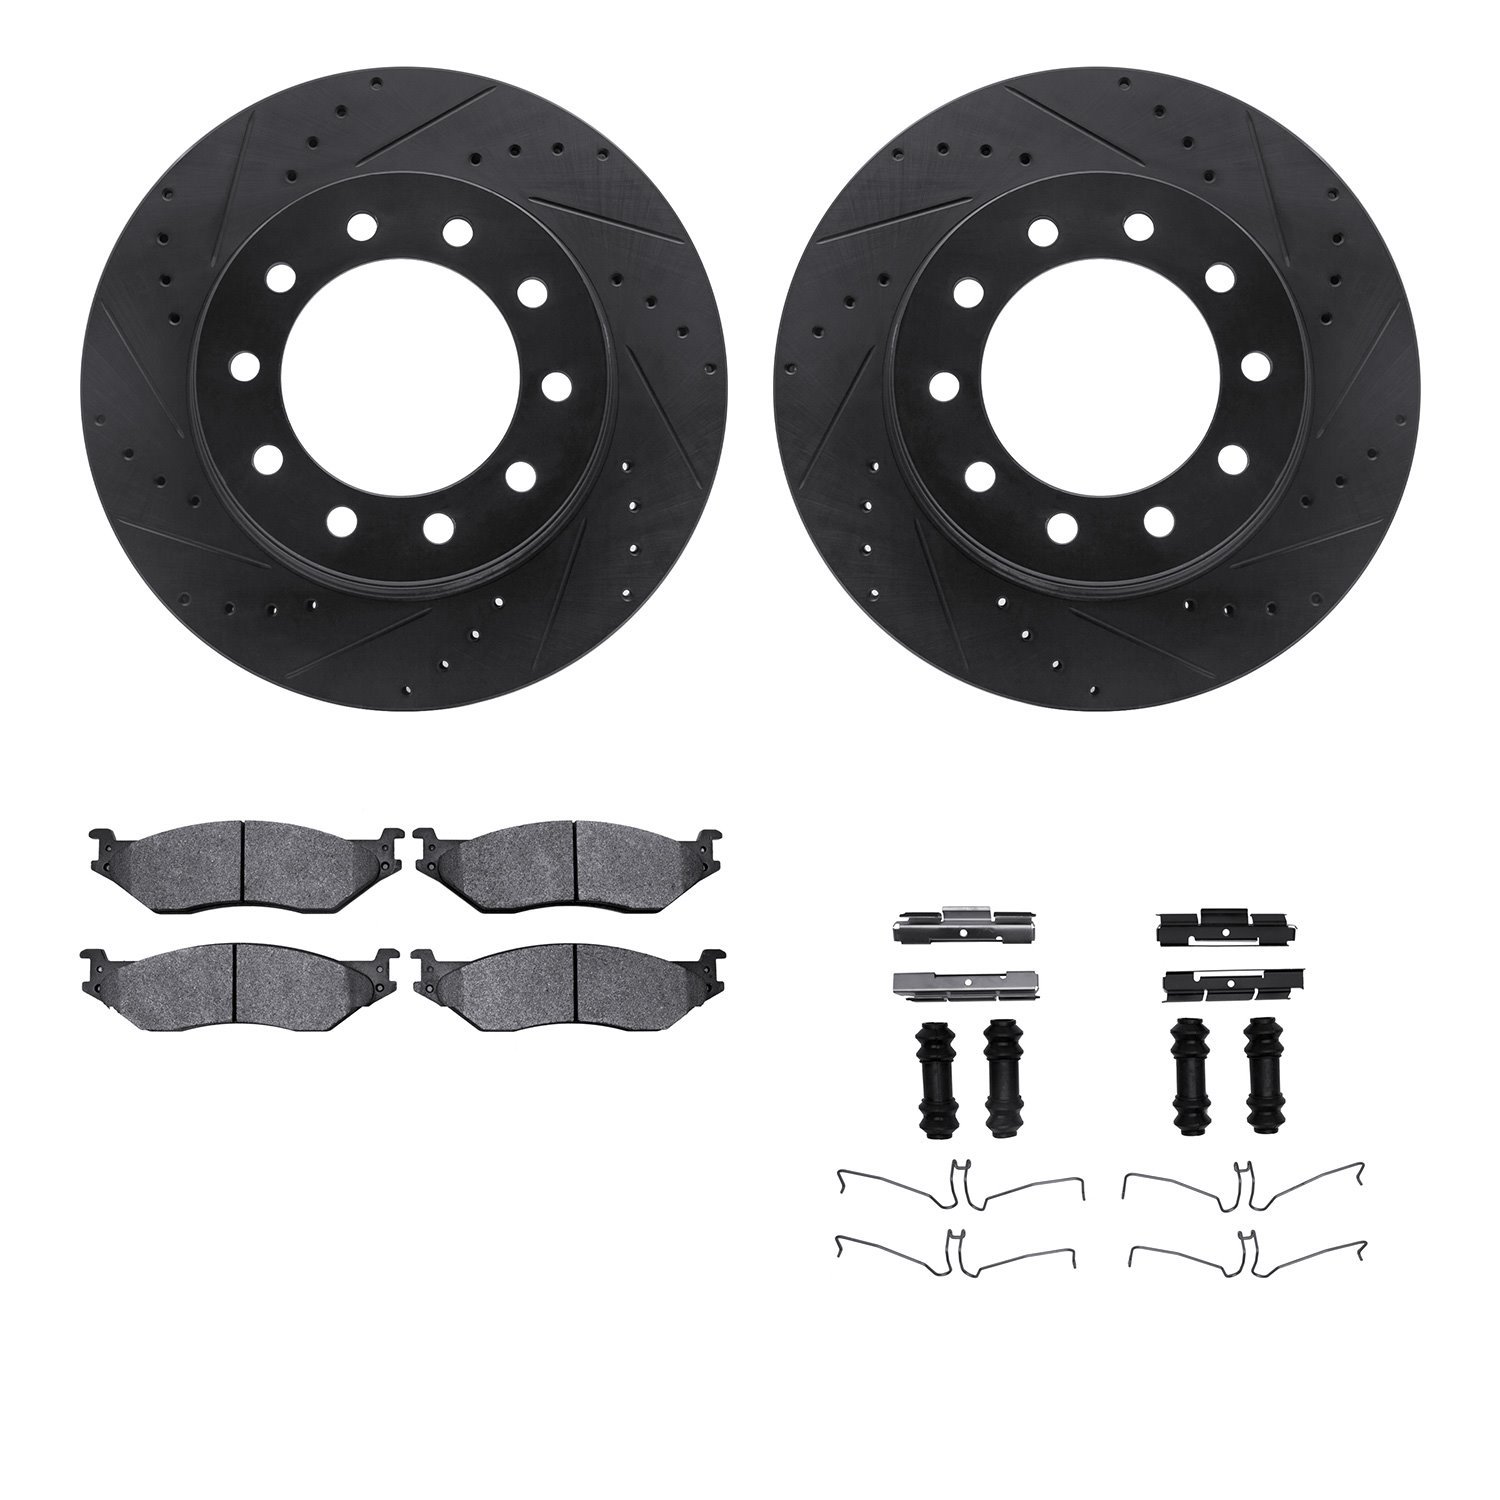 8412-54080 Drilled/Slotted Brake Rotors with Ultimate-Duty Brake Pads Kit & Hardware [Black], 2005-2016 Ford/Lincoln/Mercury/Maz